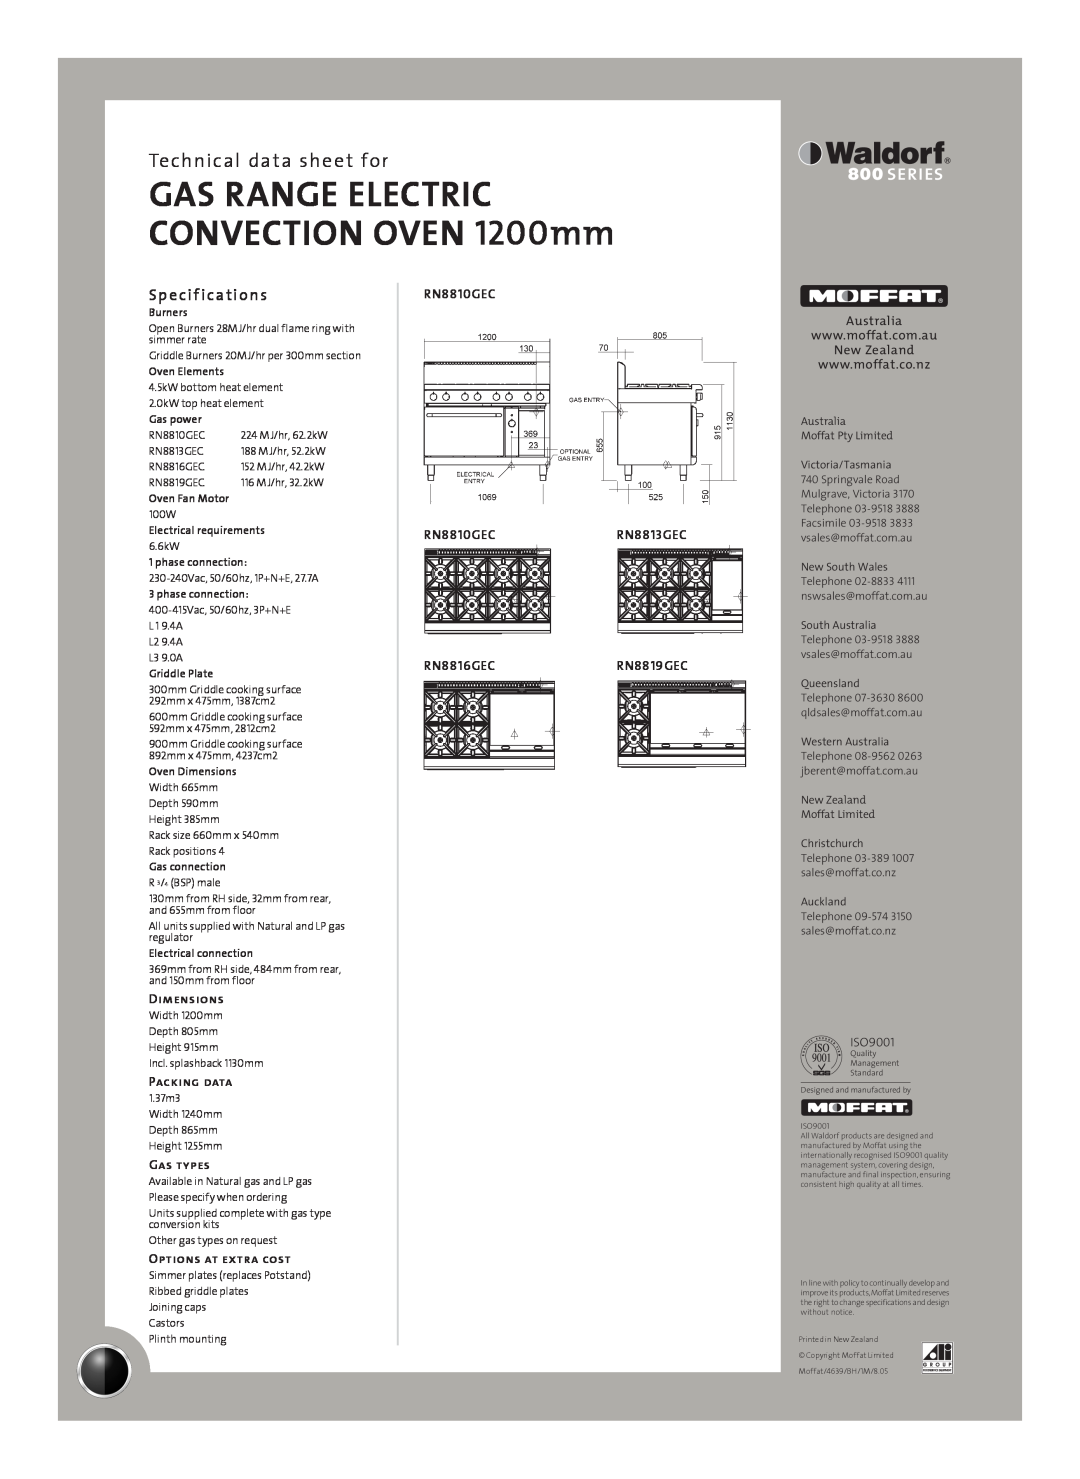 Moffat RN8816GEC manual Sp e cif ications, GAS RANGE ELECTRIC CONVECTION OVEN 1200mm, Technical data sheet for, Dimensions 